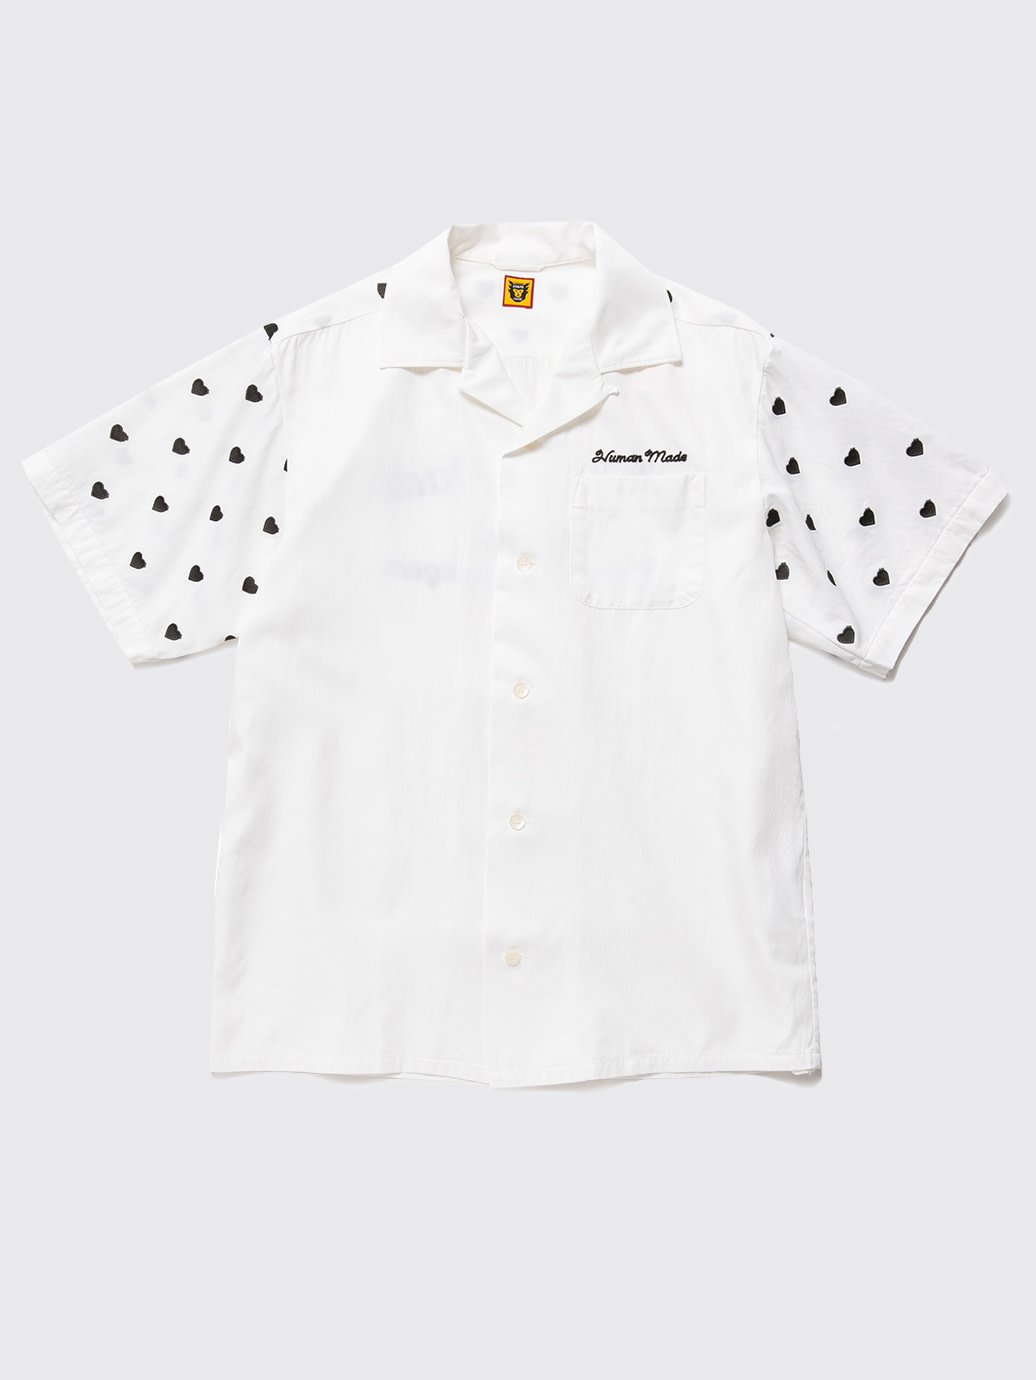 Buy White Embroidered Shirt Online - Aarke International Store View